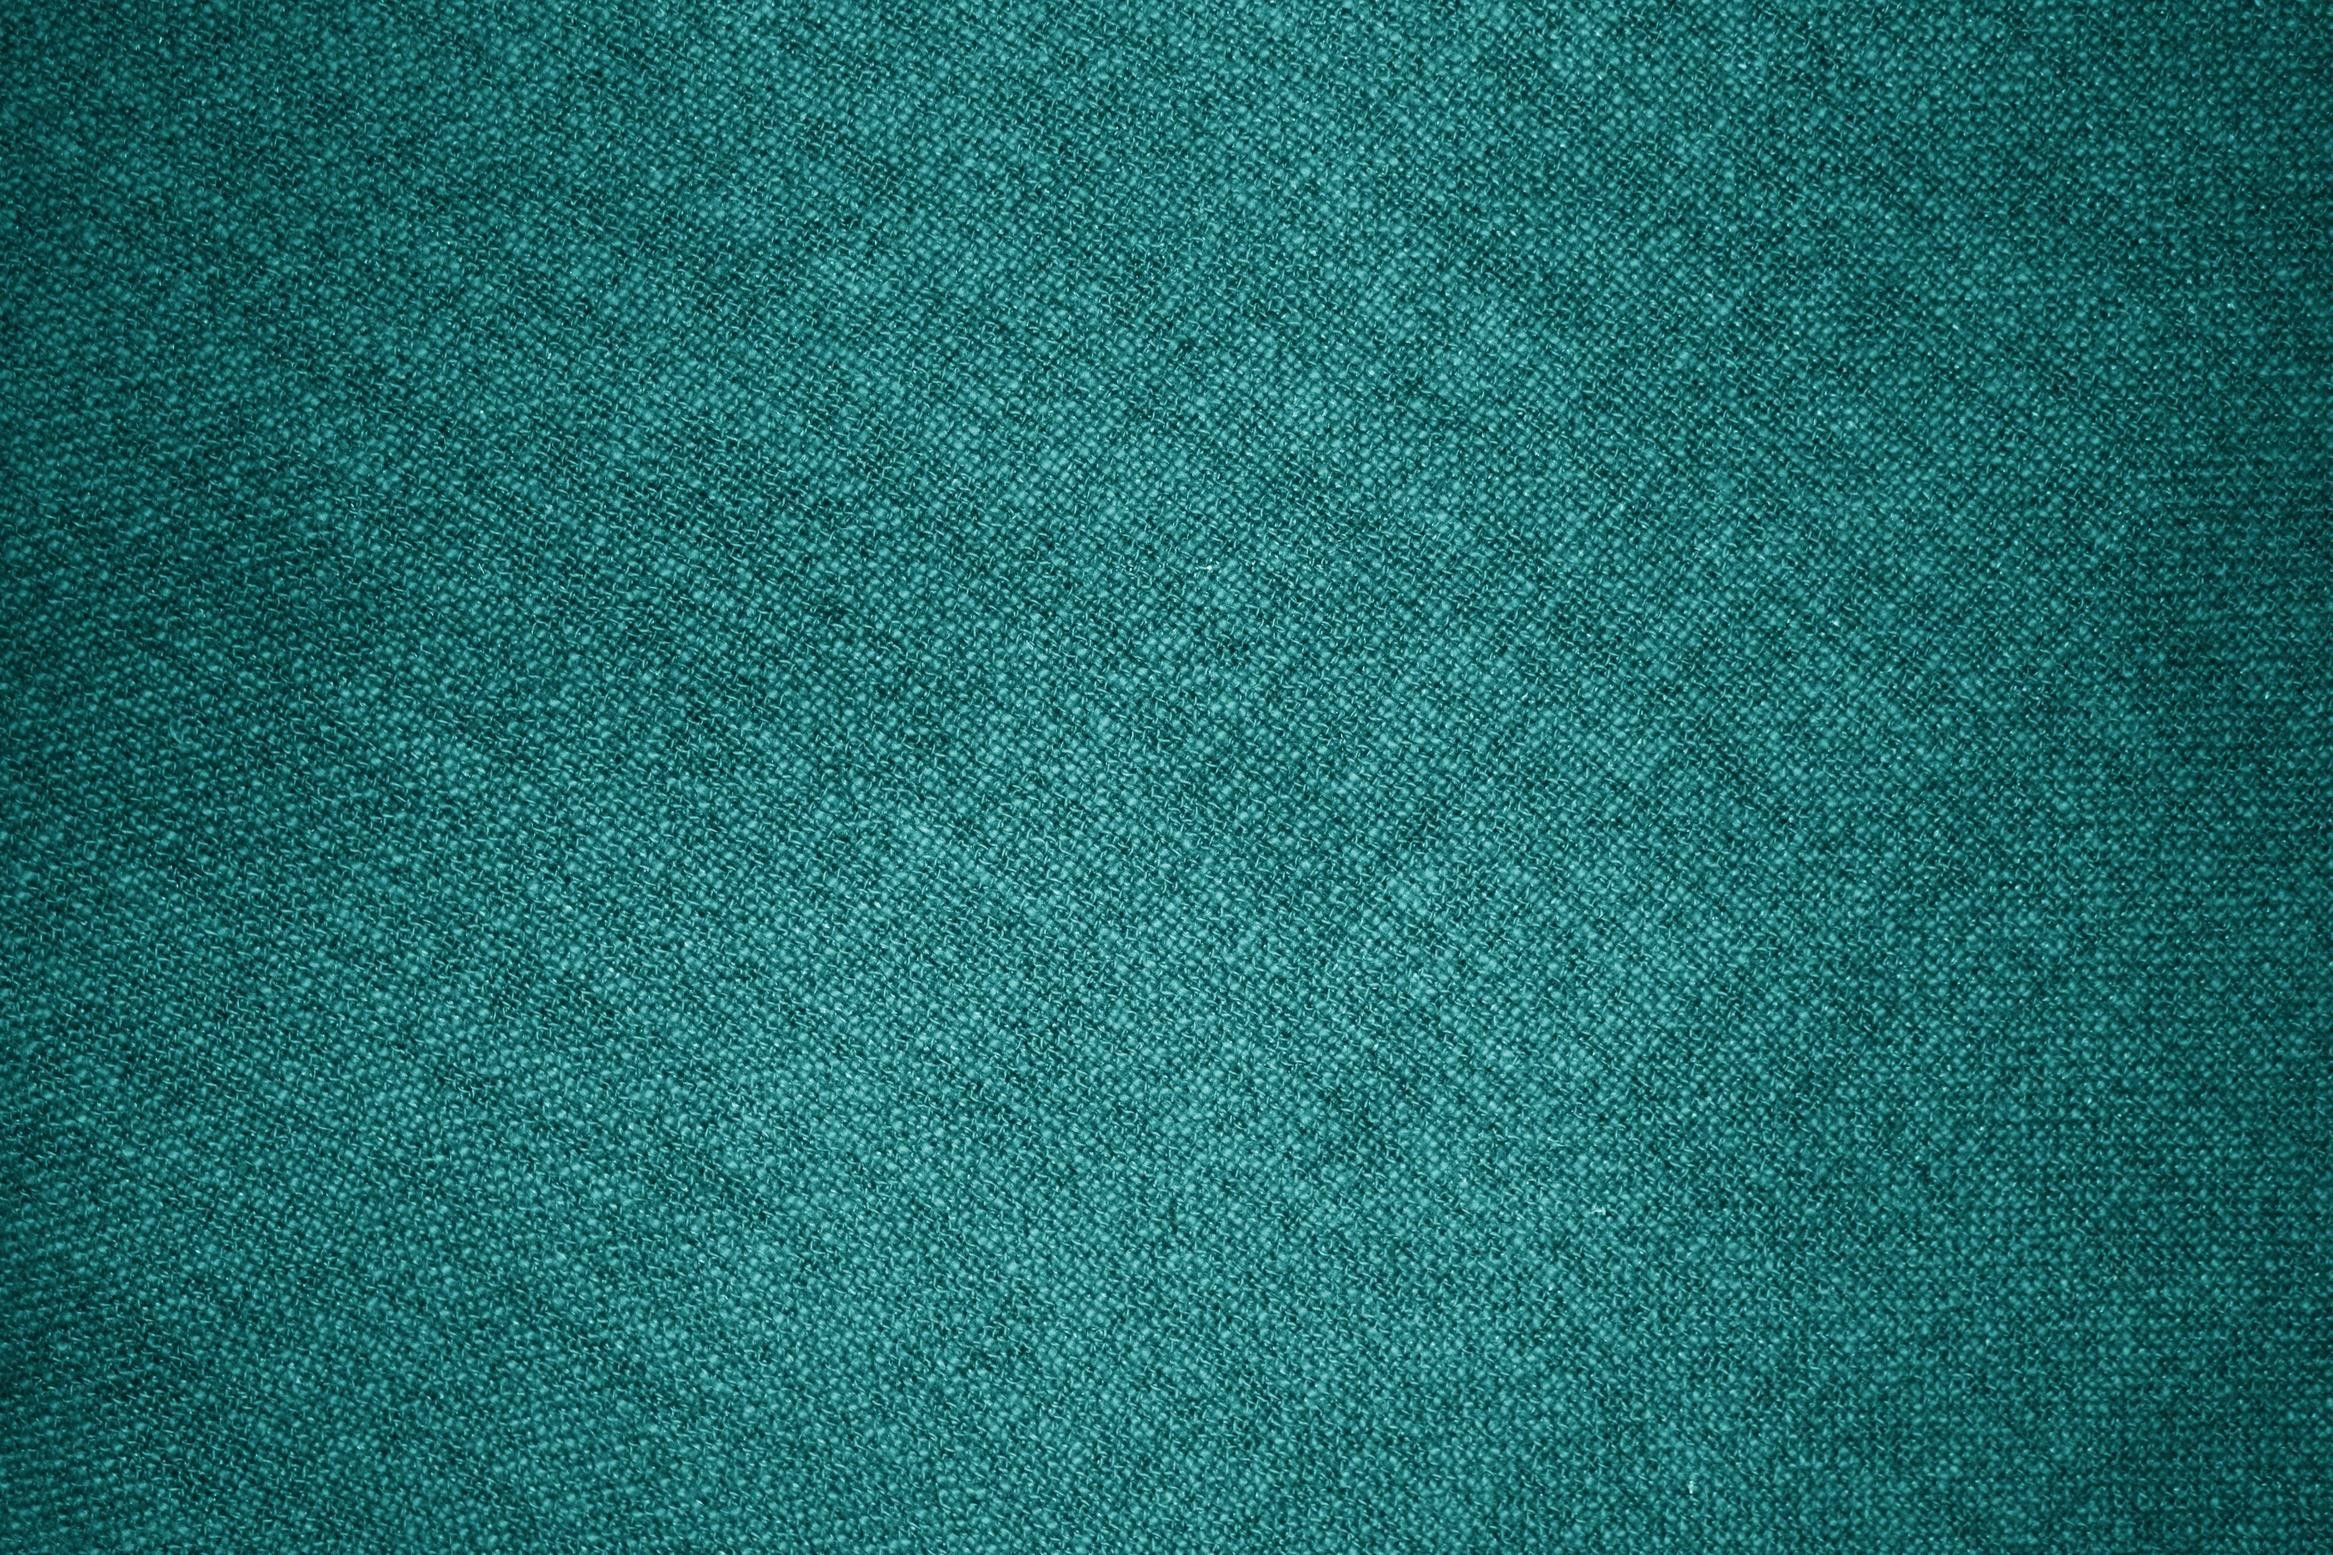 Top 999+ Teal Wallpaper Full HD, 4K✓Free to Use